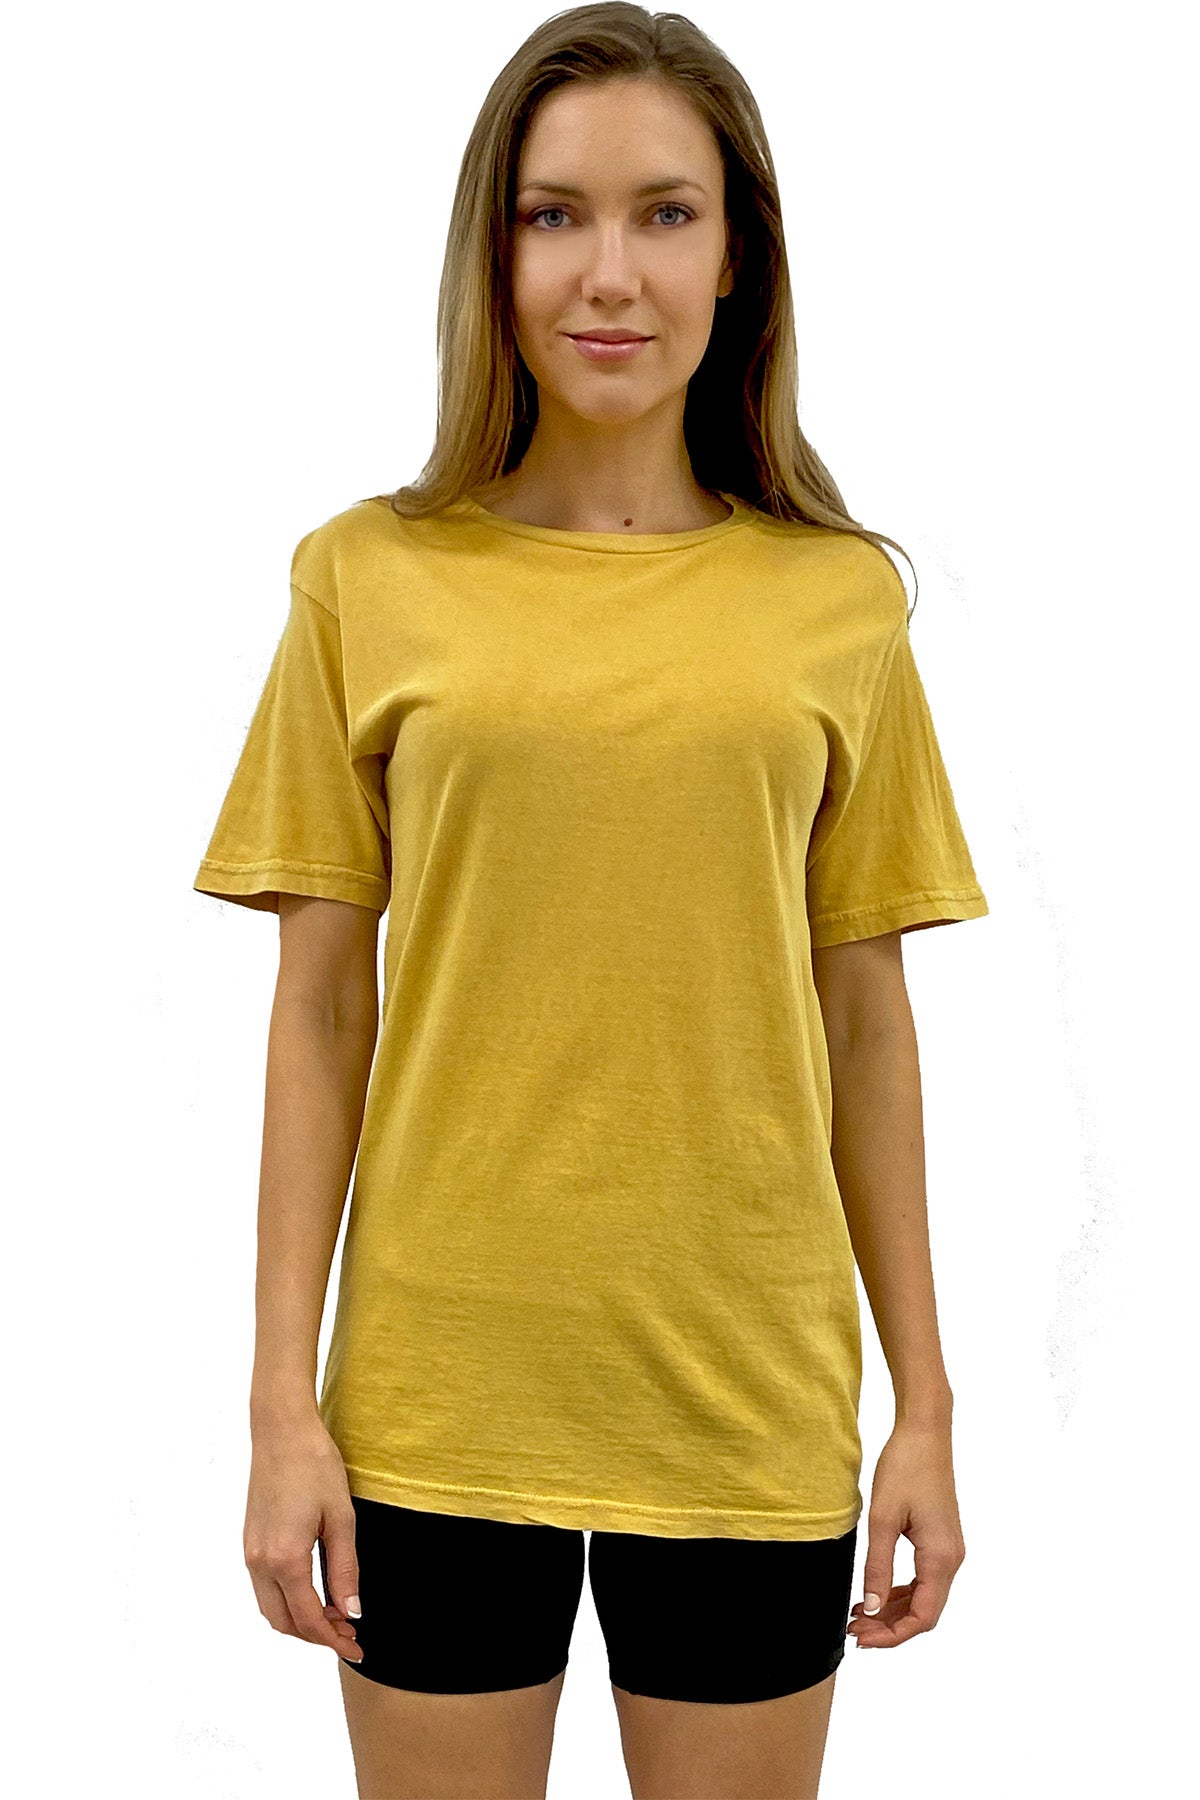 Expert Apparel Retail Made in USA women's Unisex Vintage Mineral Wash Tees black image 2#color_vintage-mustard